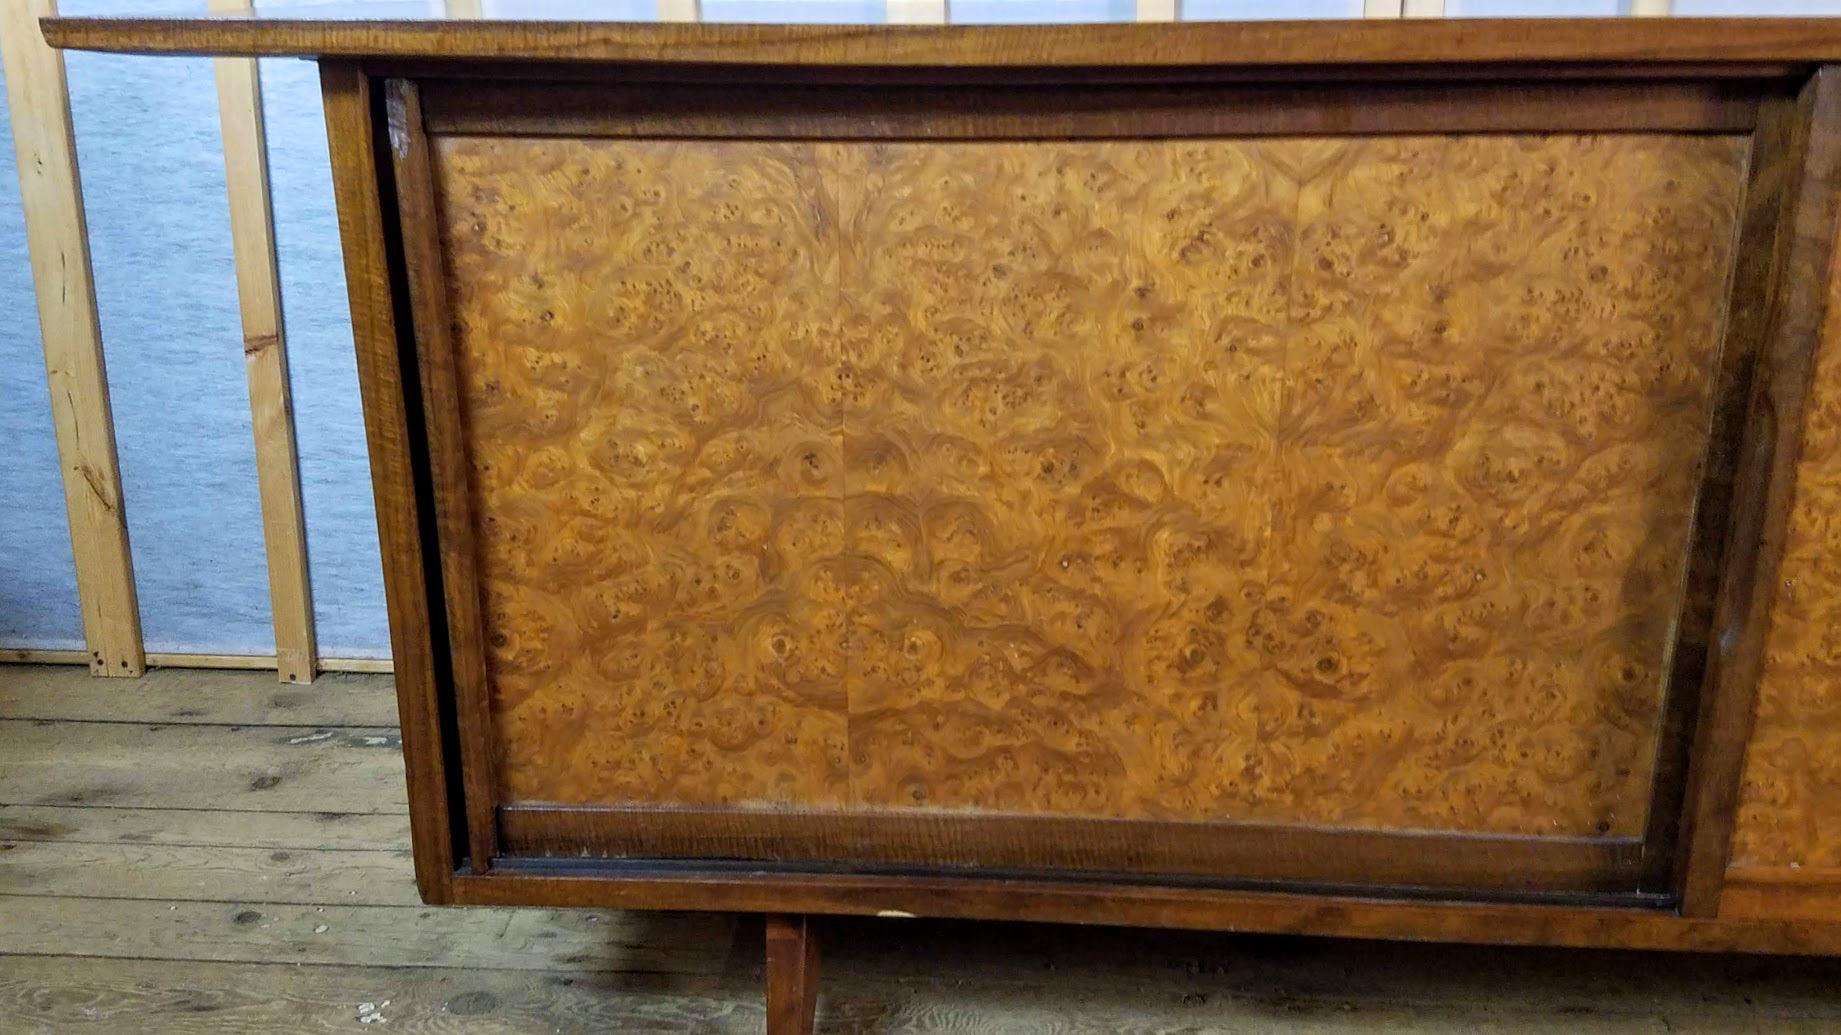 George Nakashima sideboard Model 205 manufactured in 1961 by the Widdicomb Furniture Company of Grand Rapids, Michigan as part of his Origins line of furniture produced between 1959-1963.
The sideboard is signed, stamped, labeled and dated.
The